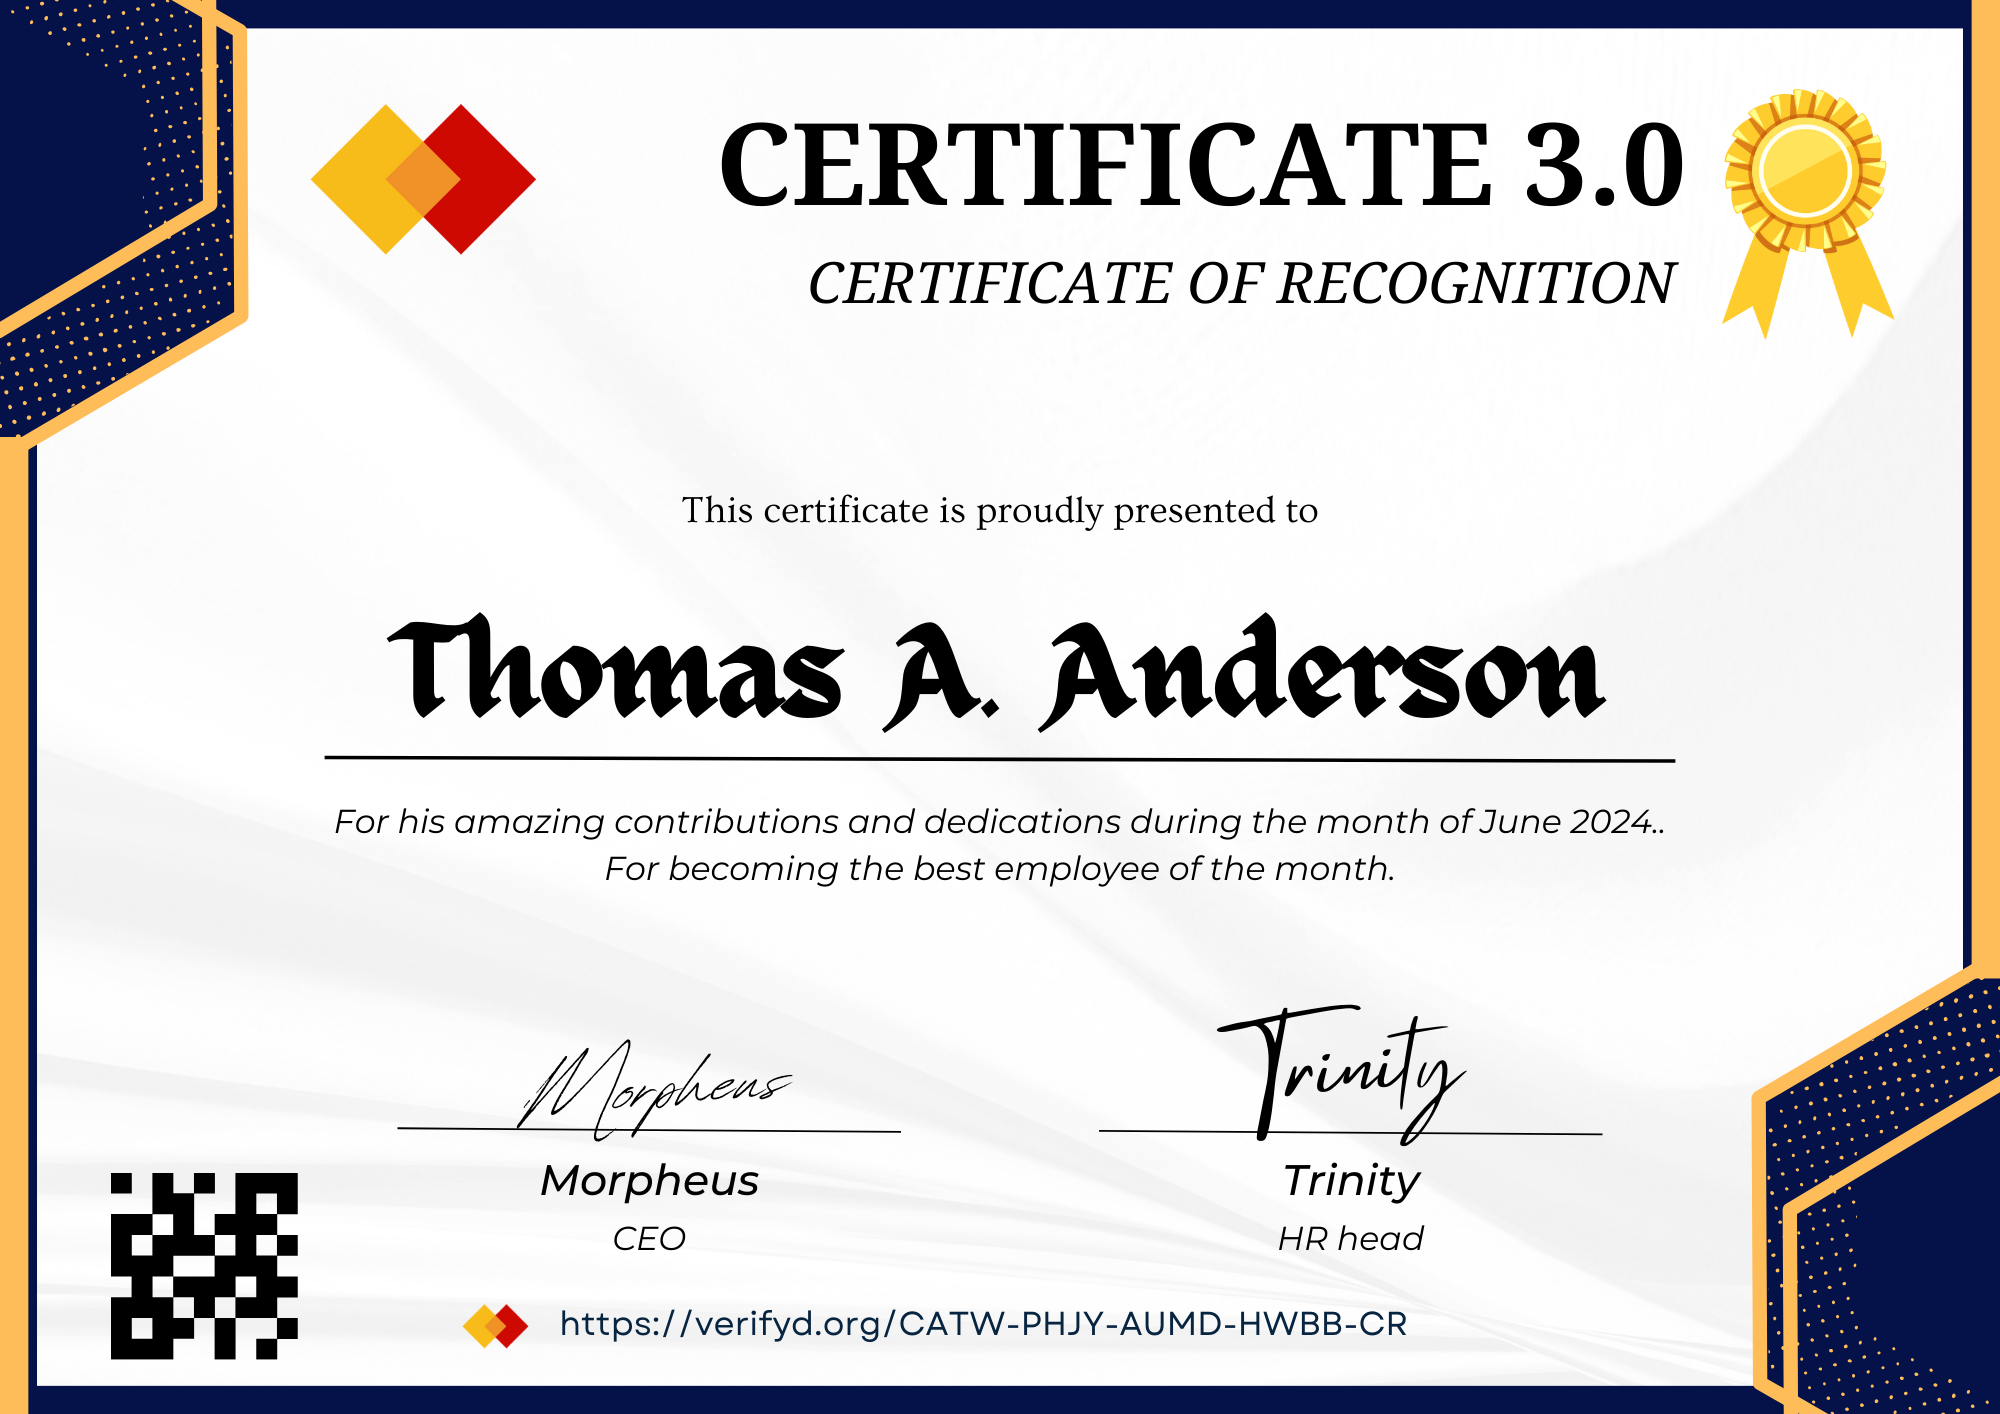 Certificate 3.0 Set to Revolutionize Credential Verification with Advanced Blockchain Technology